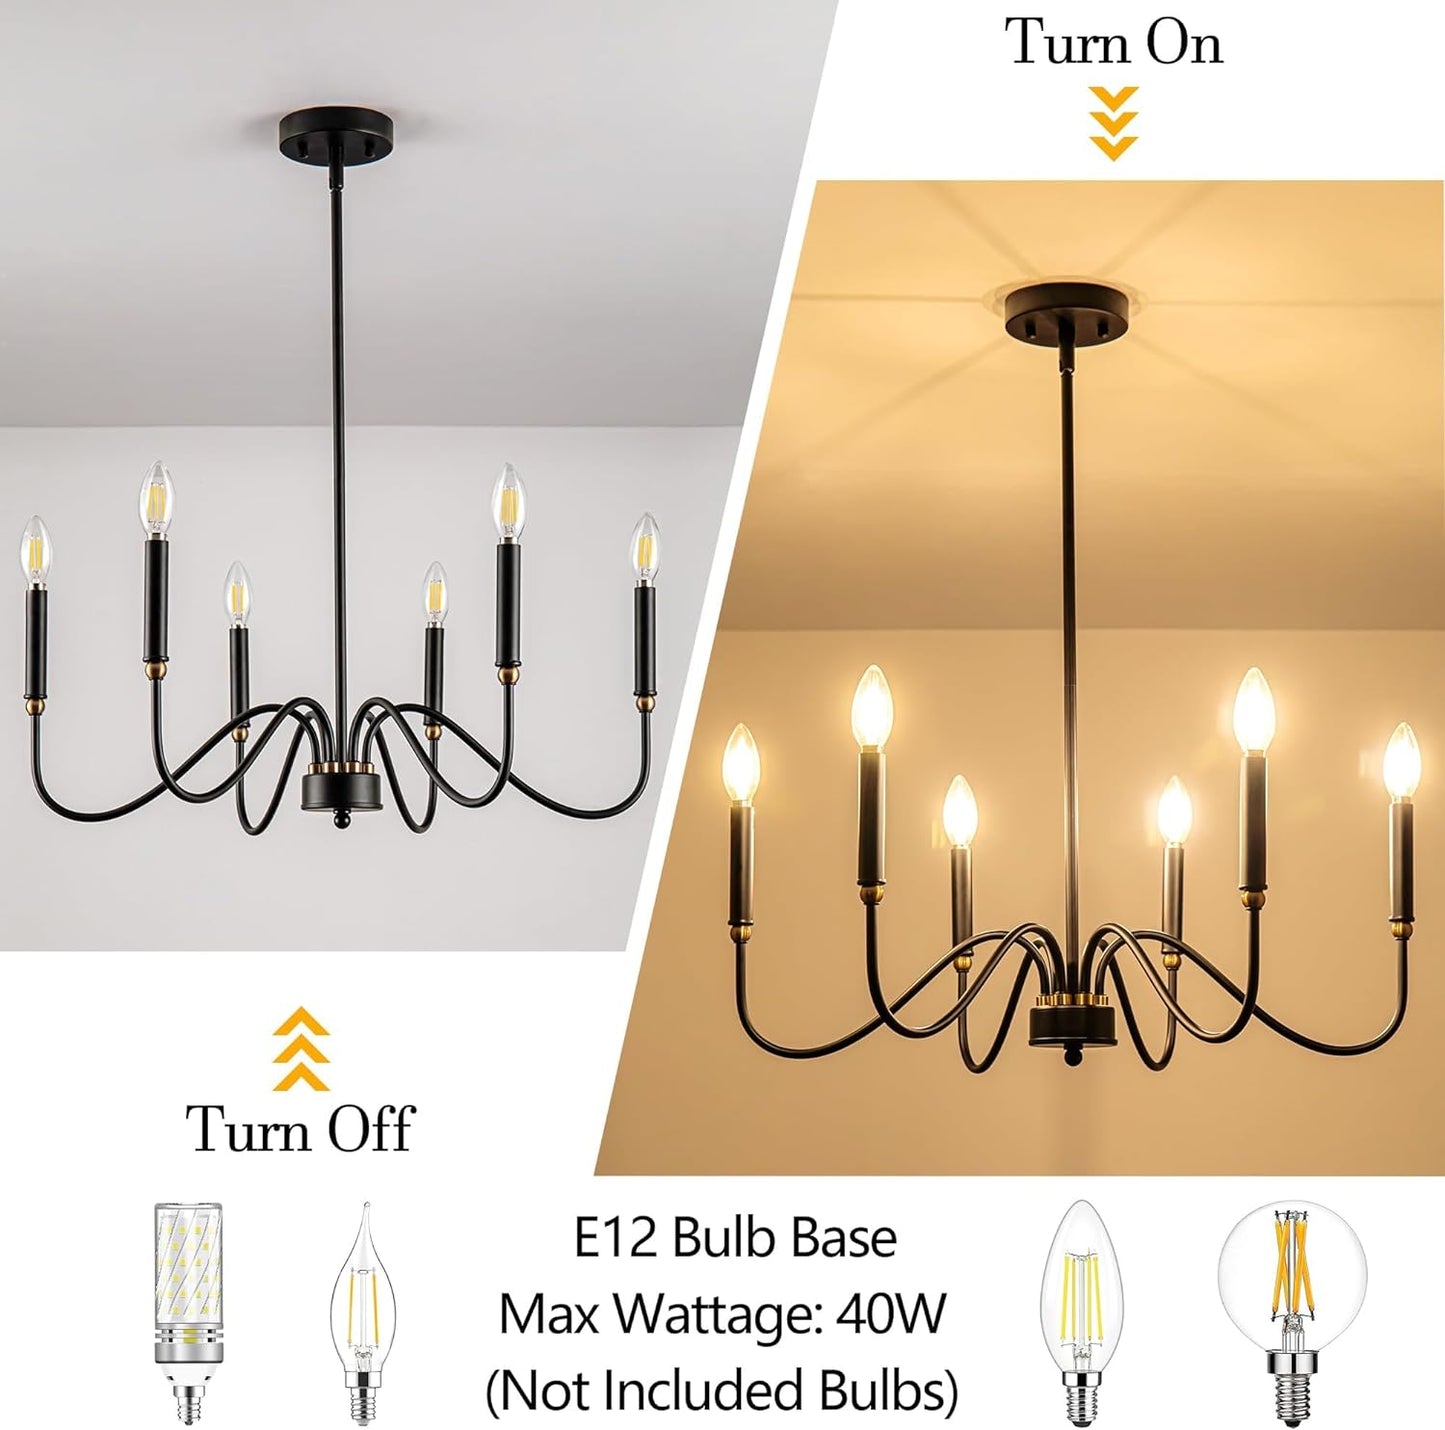 Chandeliers for Entryway Farmhouse Chandelier for Dining Room Light Fixture Hanging Lights for Living Room 6 Light Black Pendant Lights Kitchen Island for Hallway, Porch, Bedroom